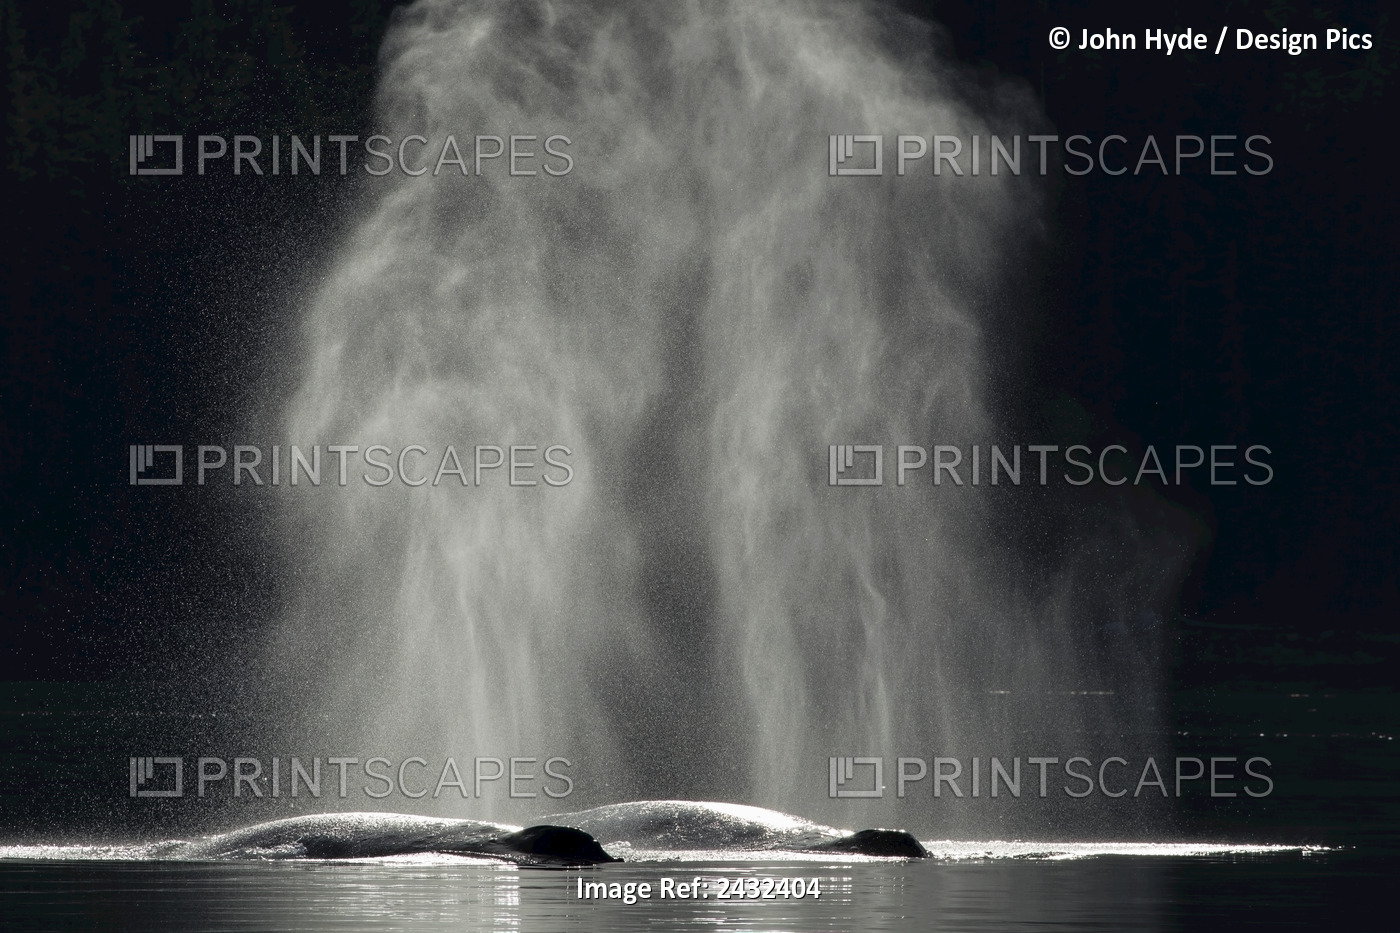 A Pair Of Humpback Whales Breath At The Surface In The Calm Waters Of Inside ...